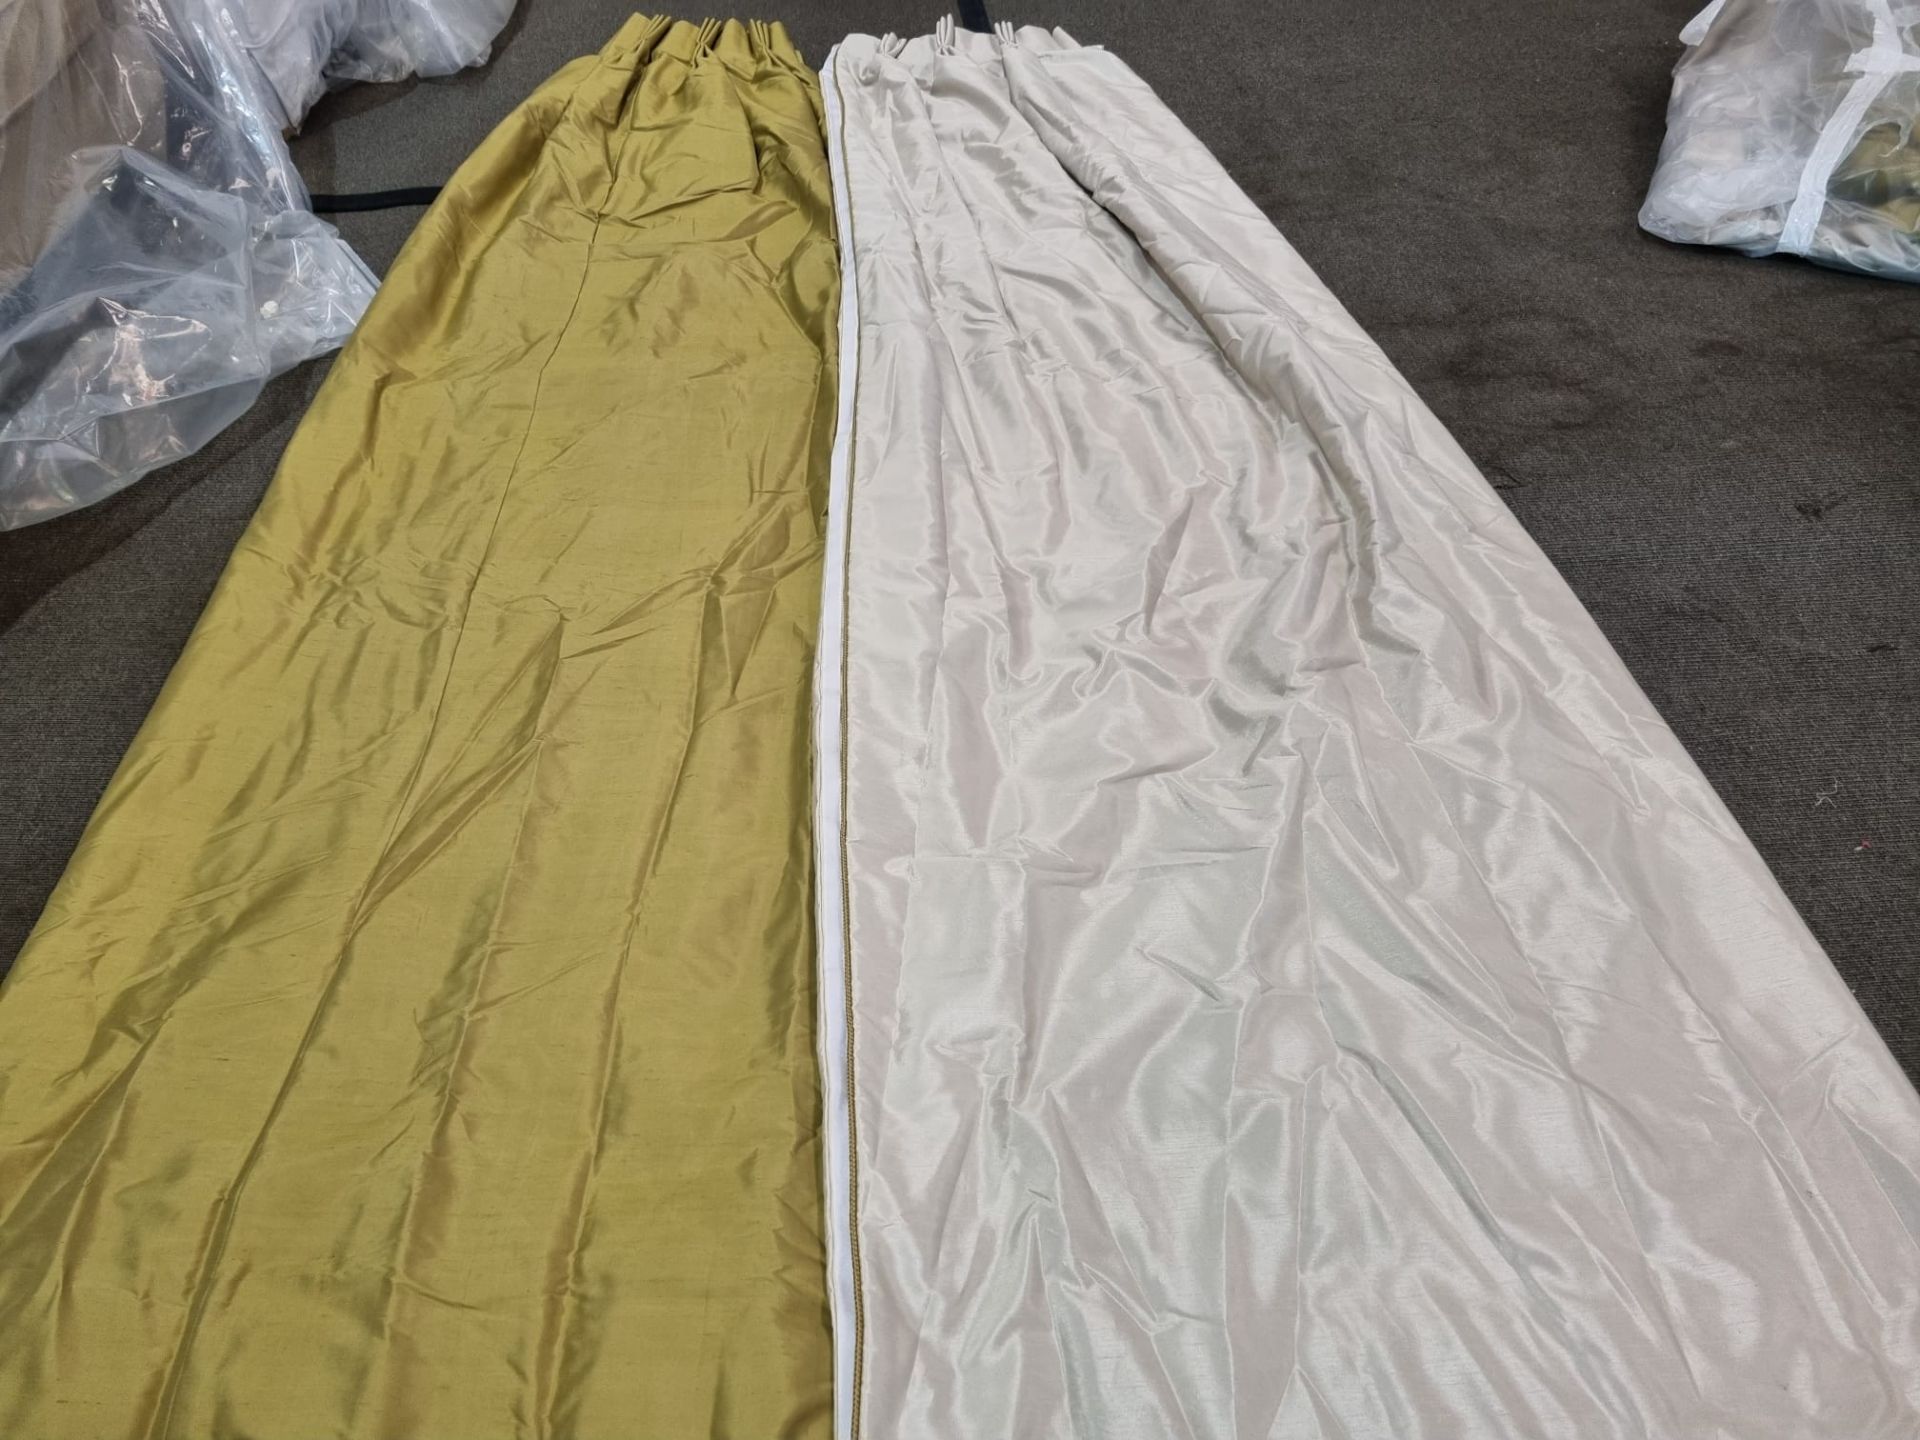 A Pair Of Green Silk Drapes With Jabots Gold Piping 170 x 272cm (Dorch 38) - Image 2 of 4